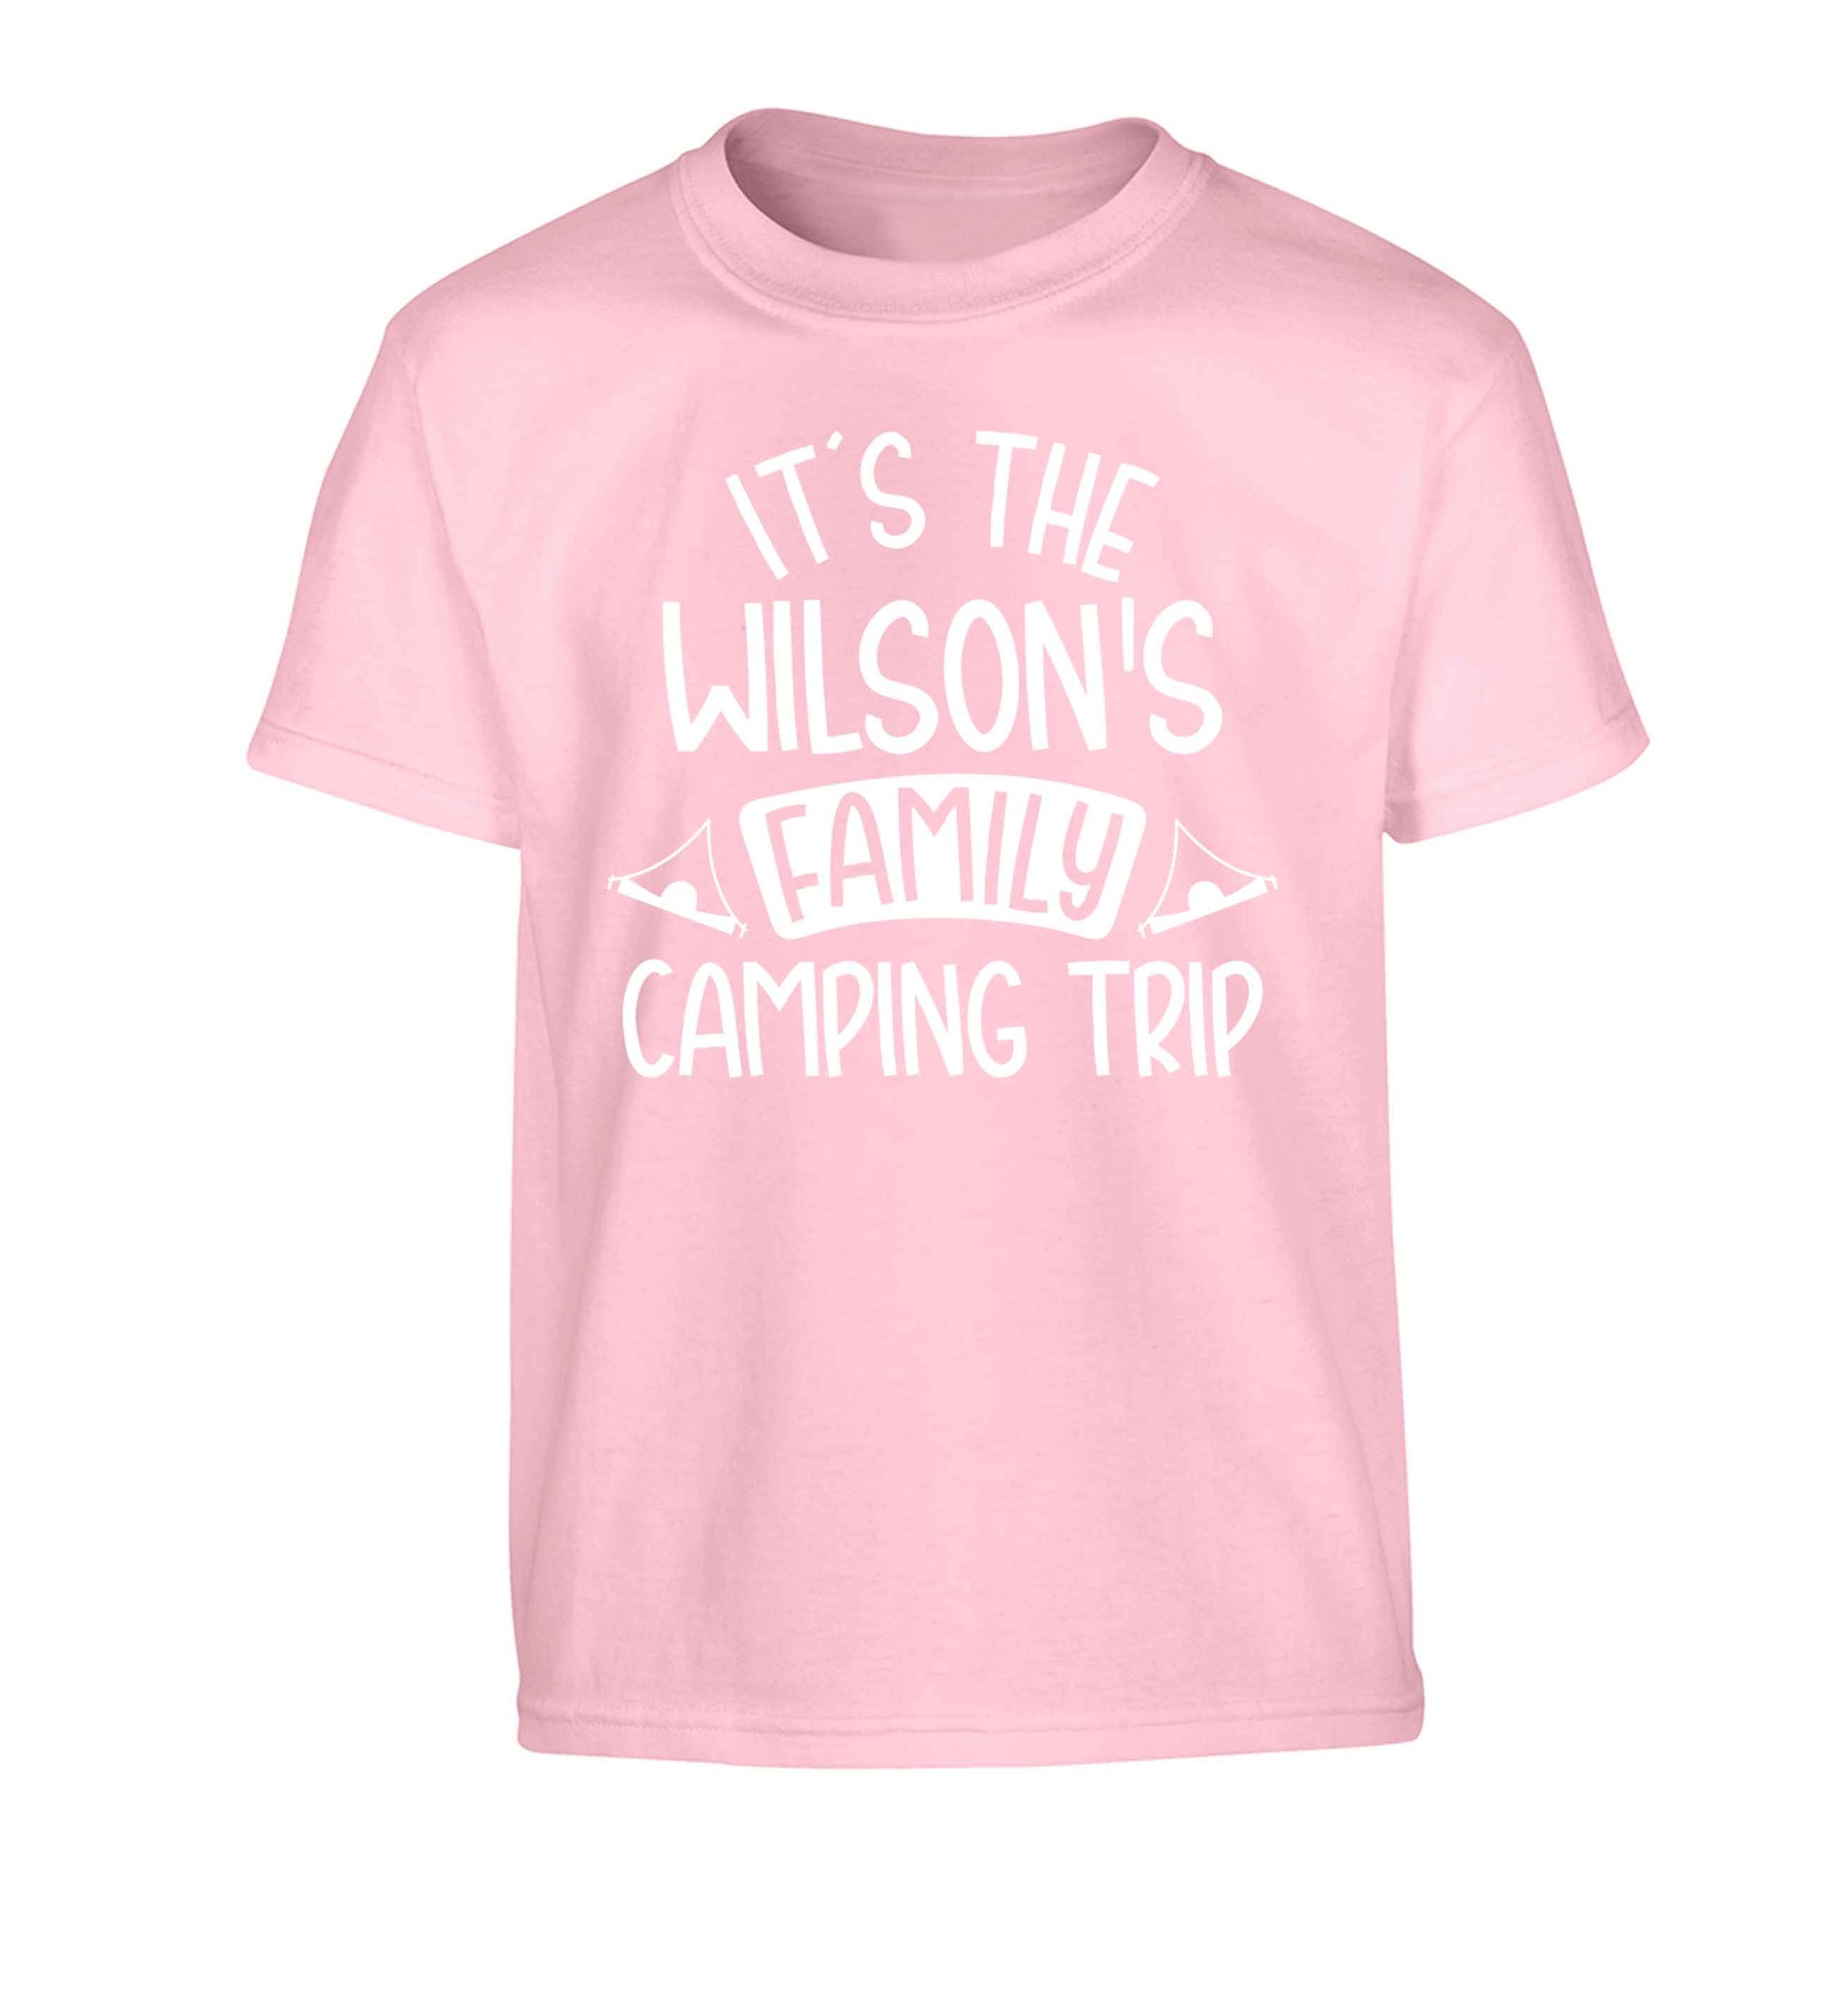 It's the Wilson's family camping trip personalised Children's light pink Tshirt 12-13 Years